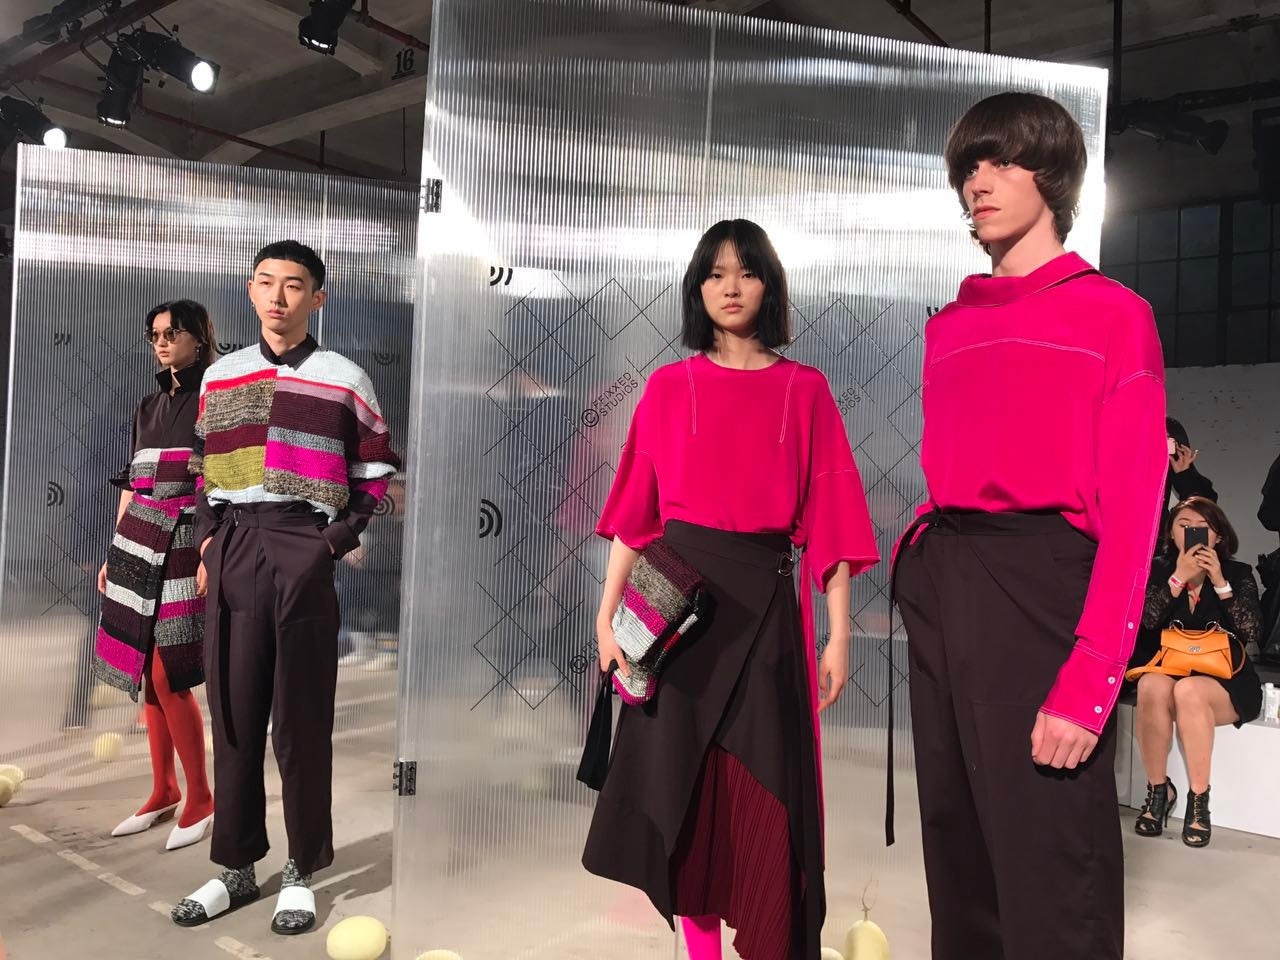 "The audience here is really mixed, the fashion crowd is experimental in finding their own style and what works, and as designers, we love that.," said co-designer of ffiXXed Studios Fiona Lau of the Labelhood platform at Shanghai Fashion Week.  (Photo by Tamsin Smith)